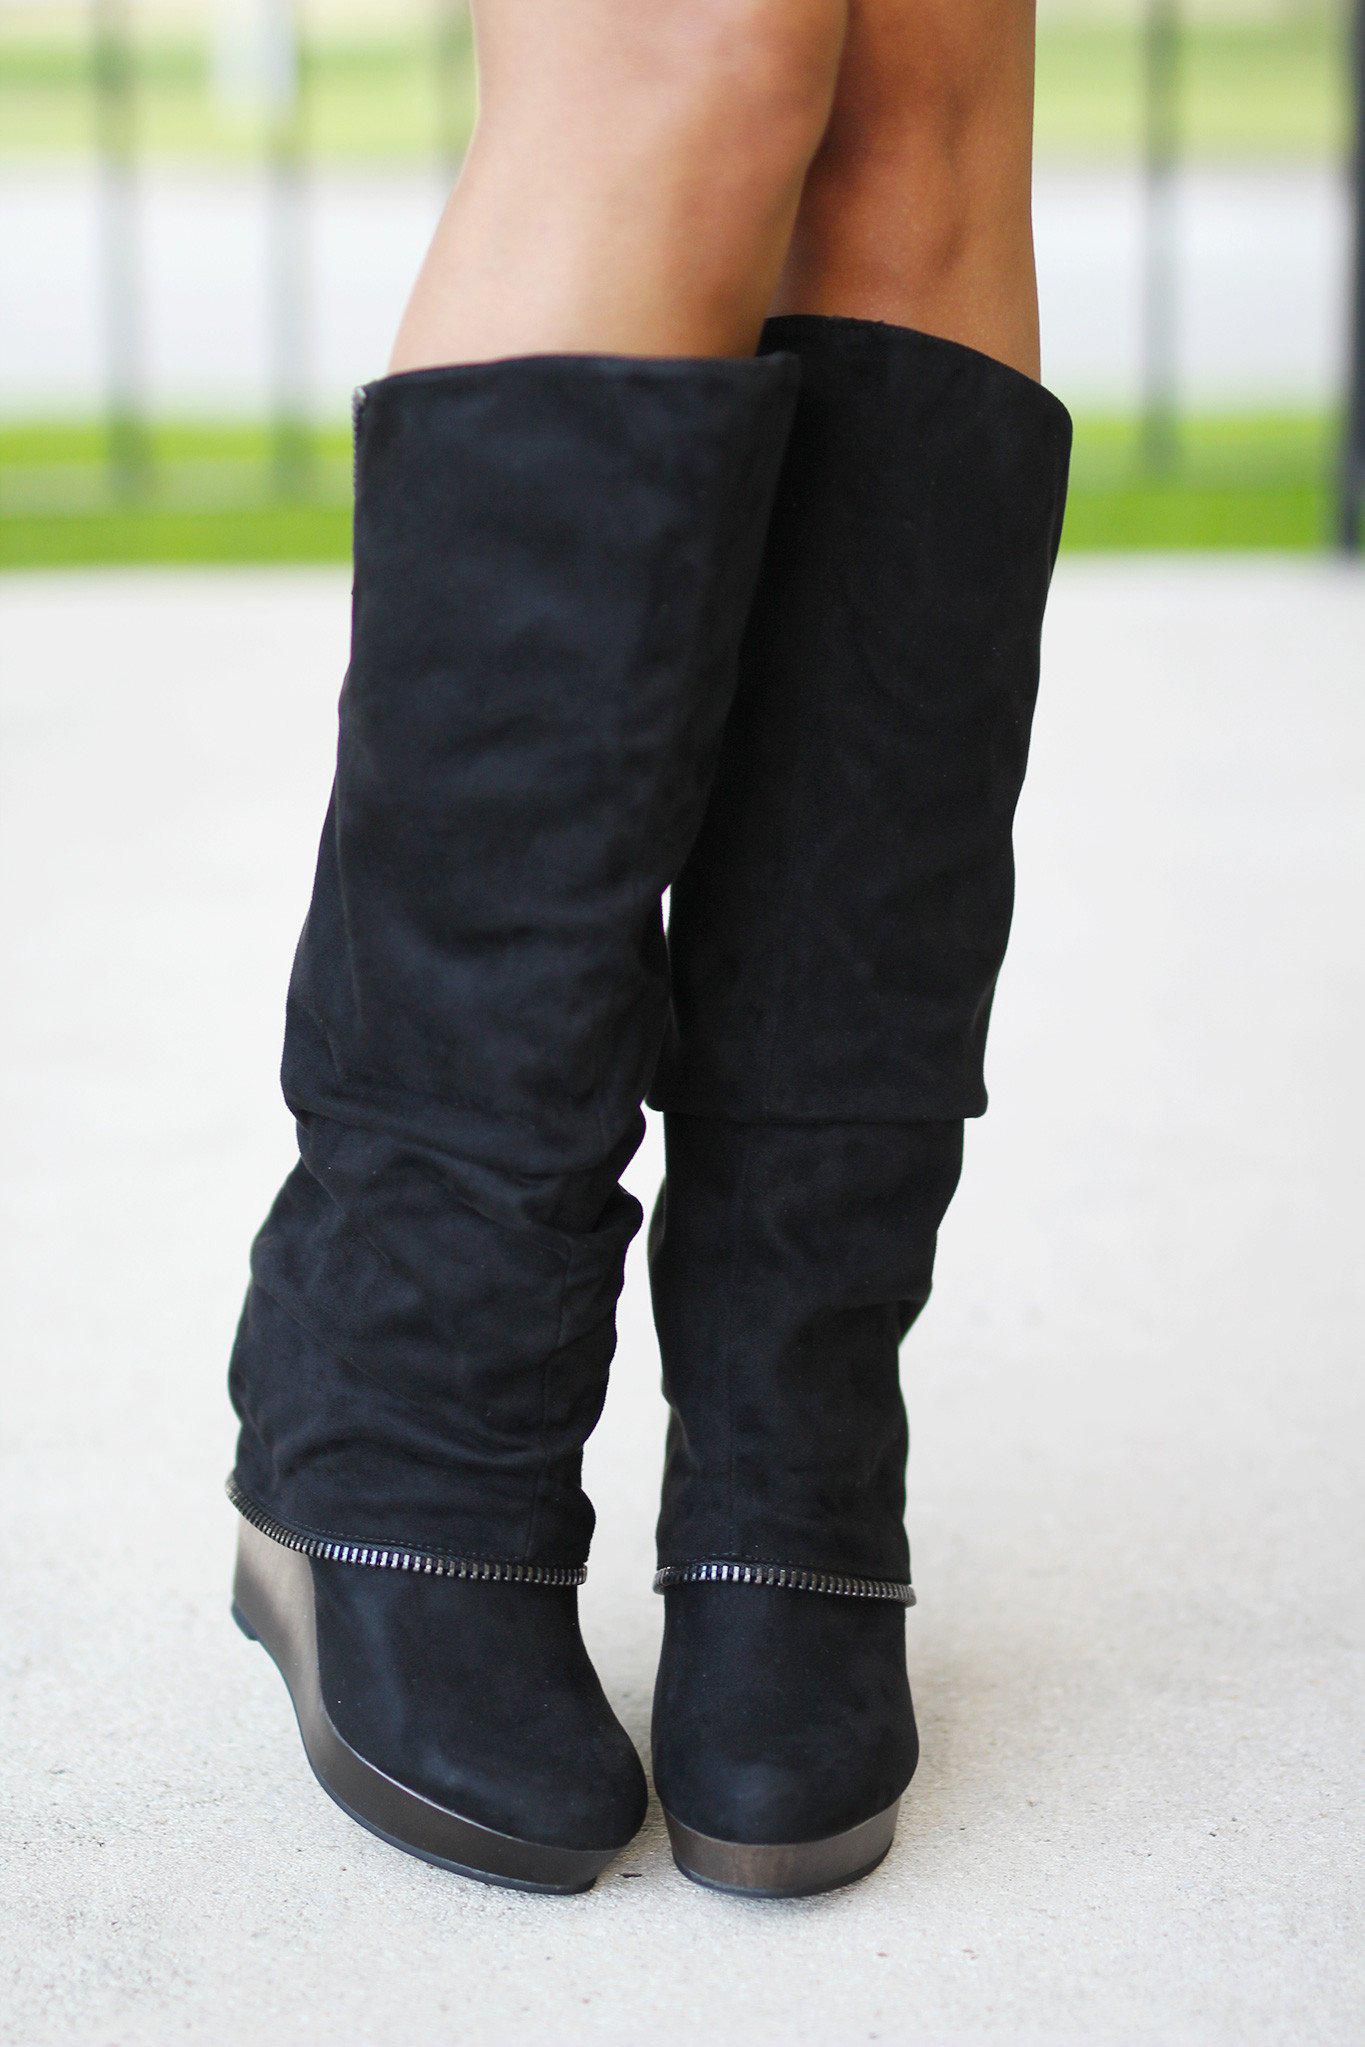 black wedge boots with arch support